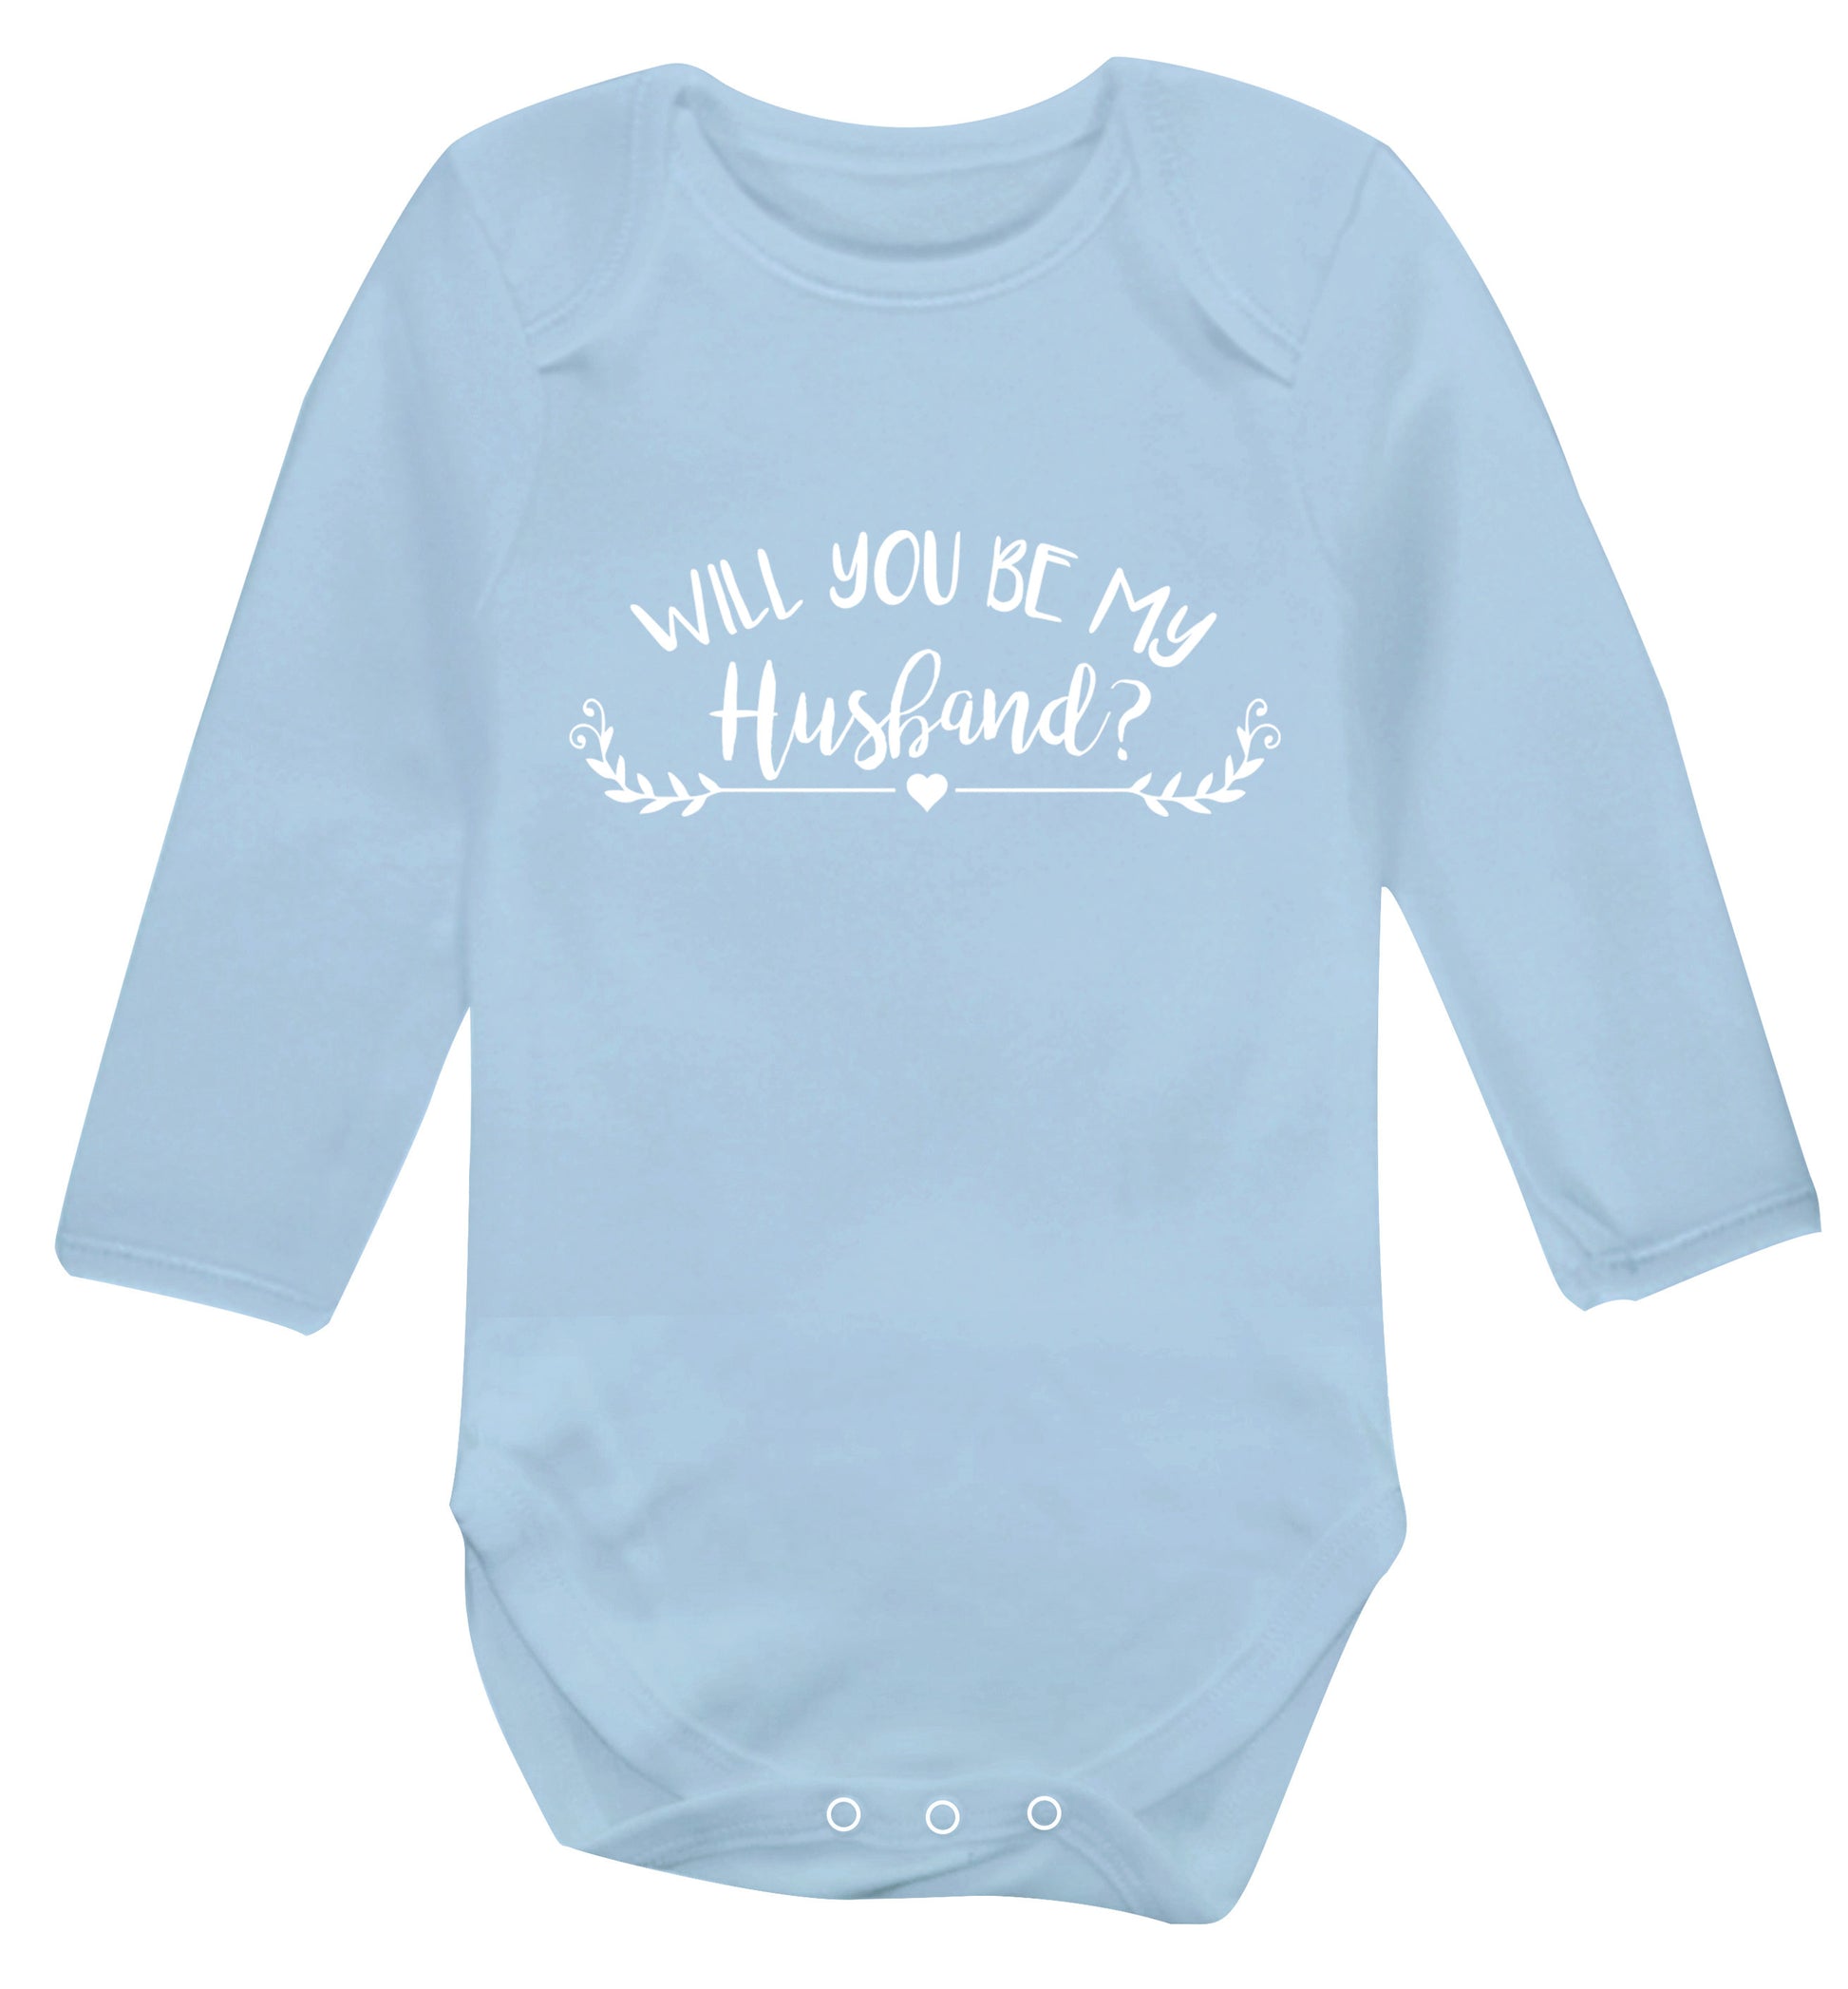 Will you be my husband? Baby Vest long sleeved pale blue 6-12 months